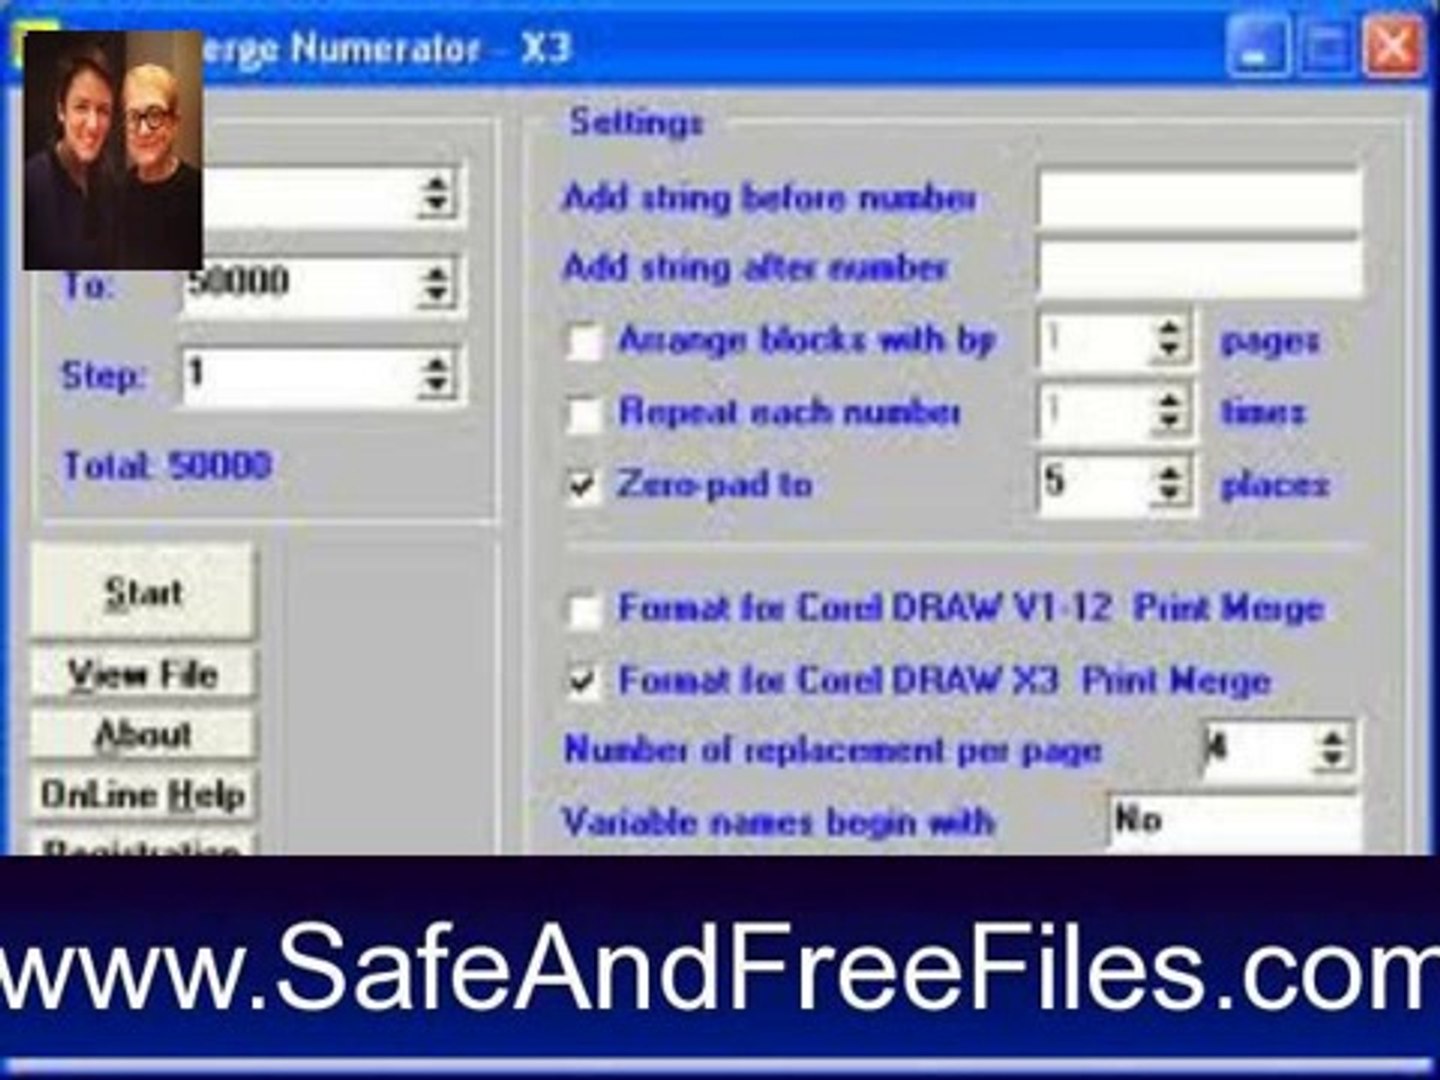 Download Merge Numerator 1.01 Serial Number Free - Dailymotion